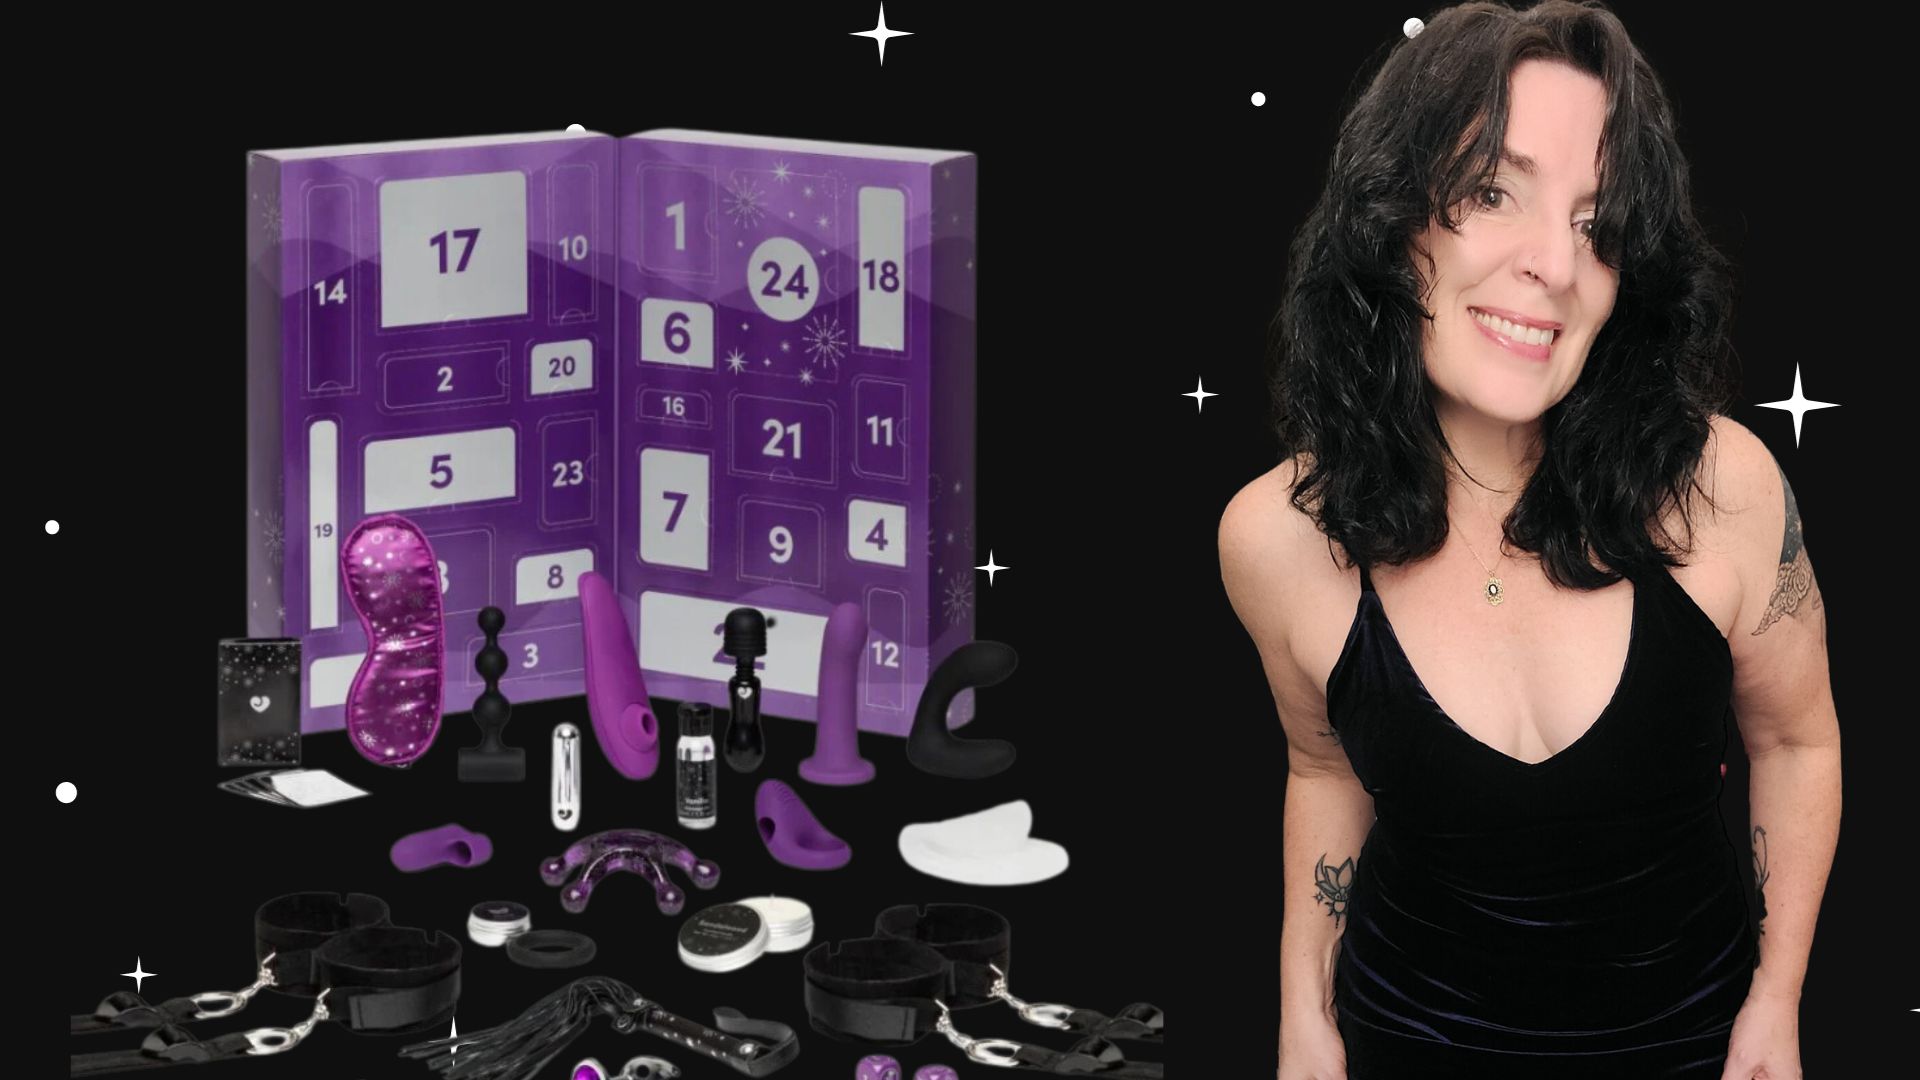 Lovehoney just released their 2022 sex toy and lingerie advent calendars